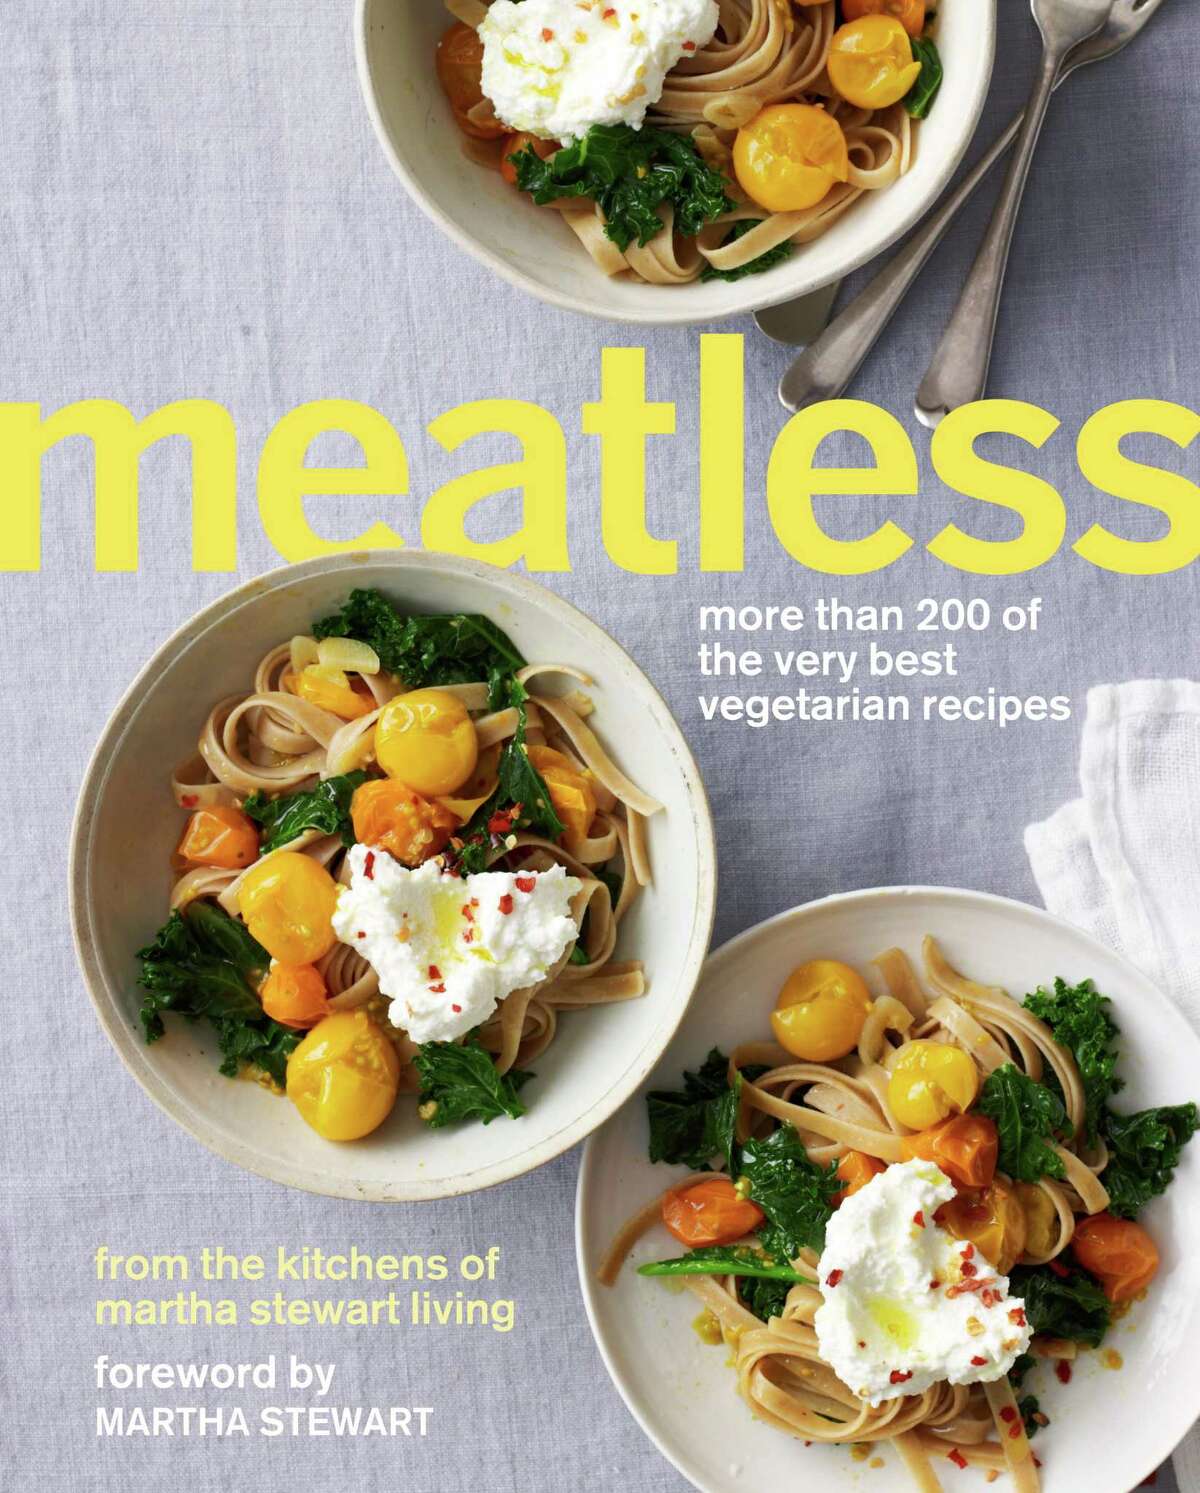 Cover: "Meatless: More Than 200 of the Very Best Vegetarian Recipes" (Clarkson Potter) from the Kitchen of Martha Stewart Living.